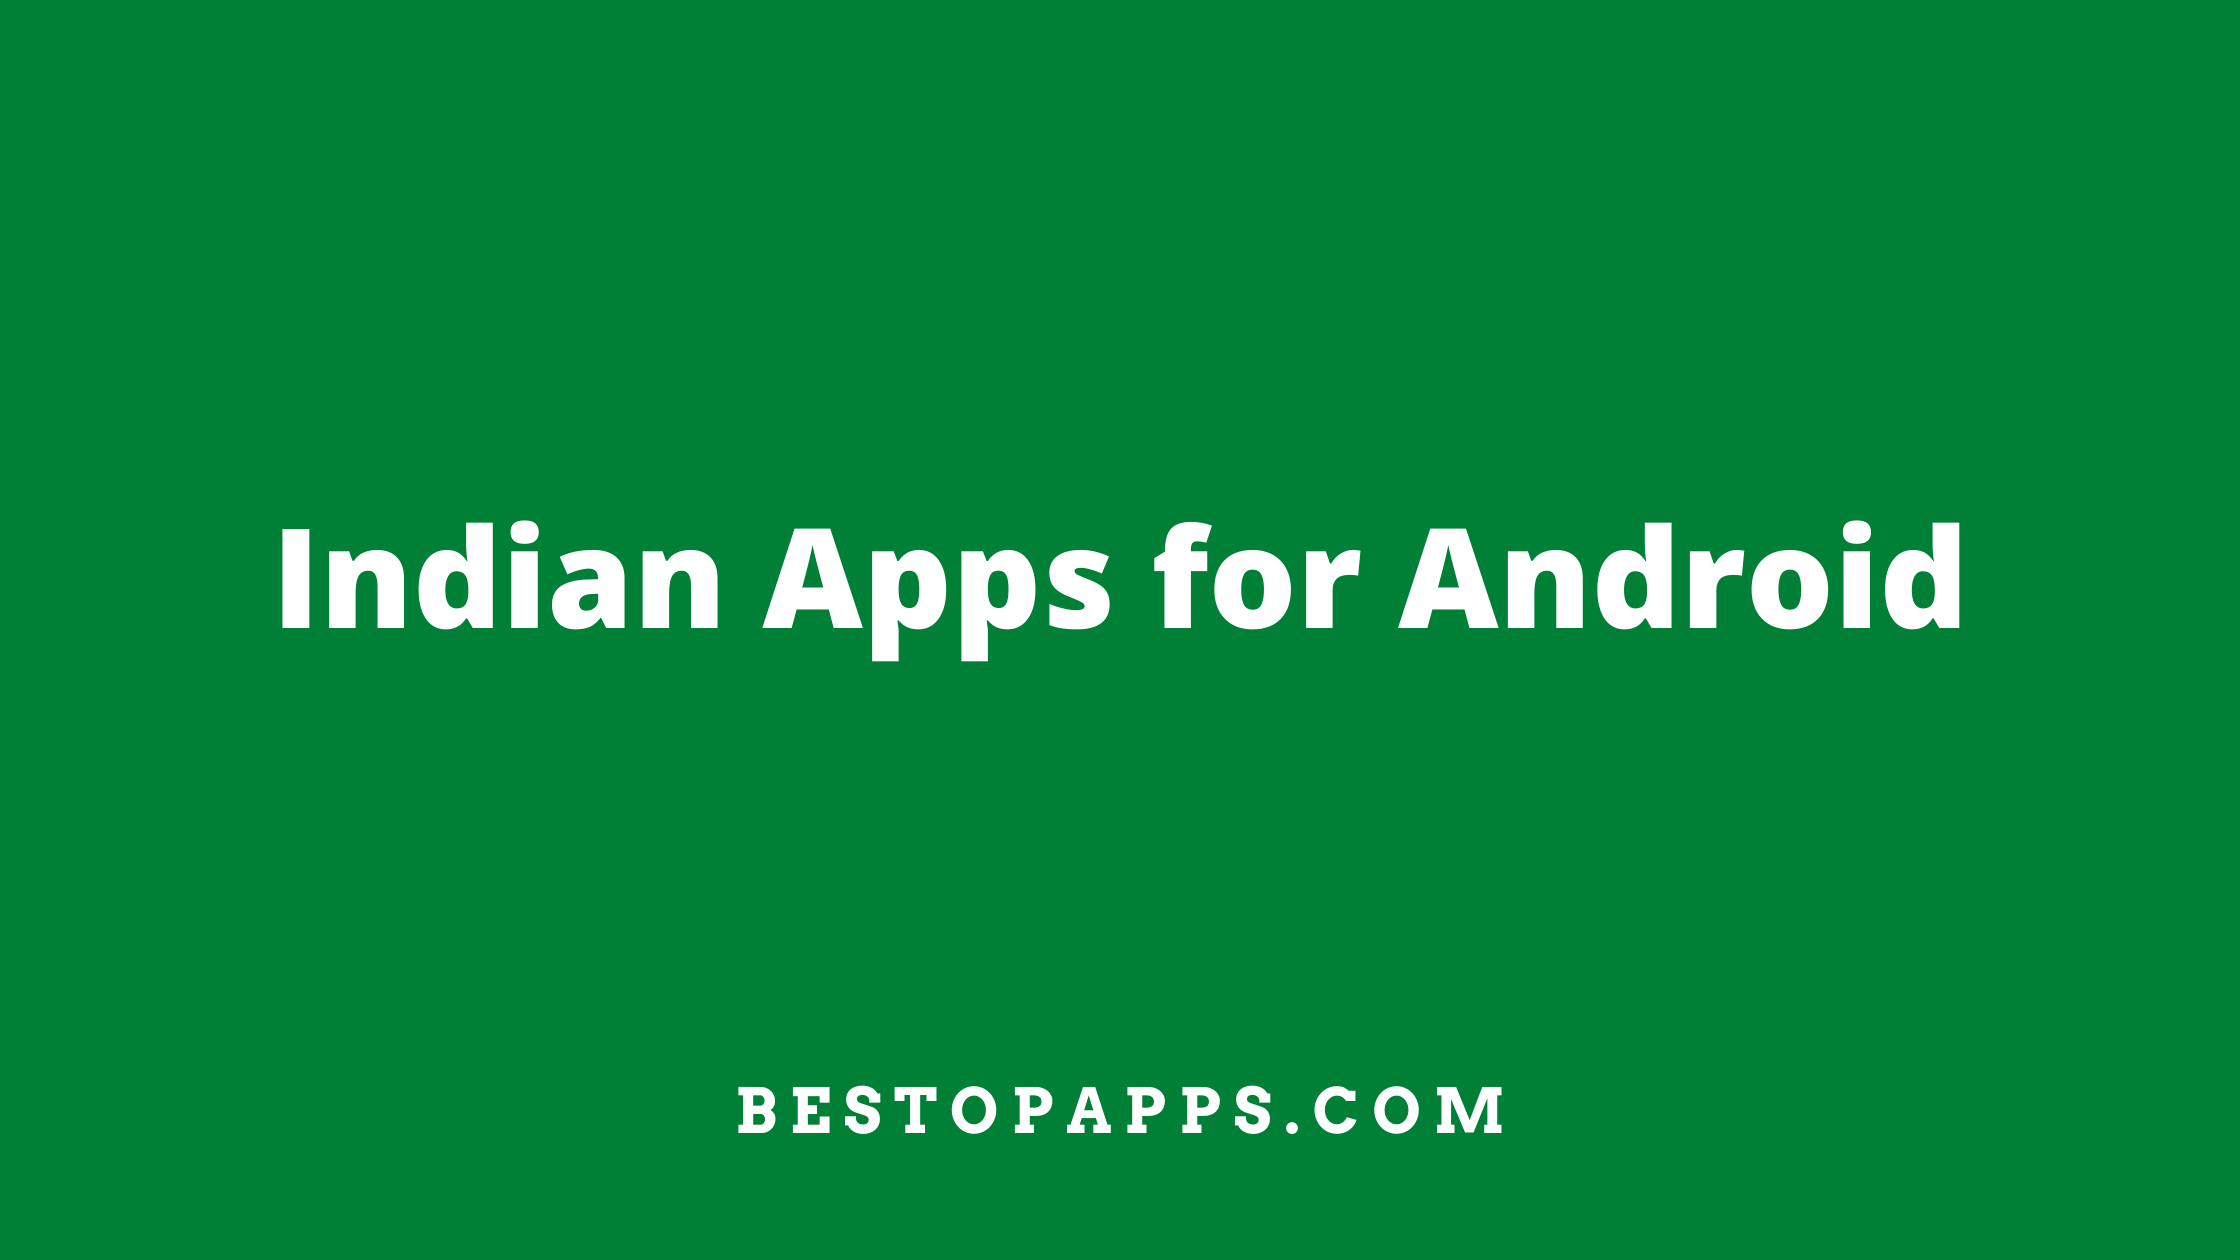 Indian Apps for Android